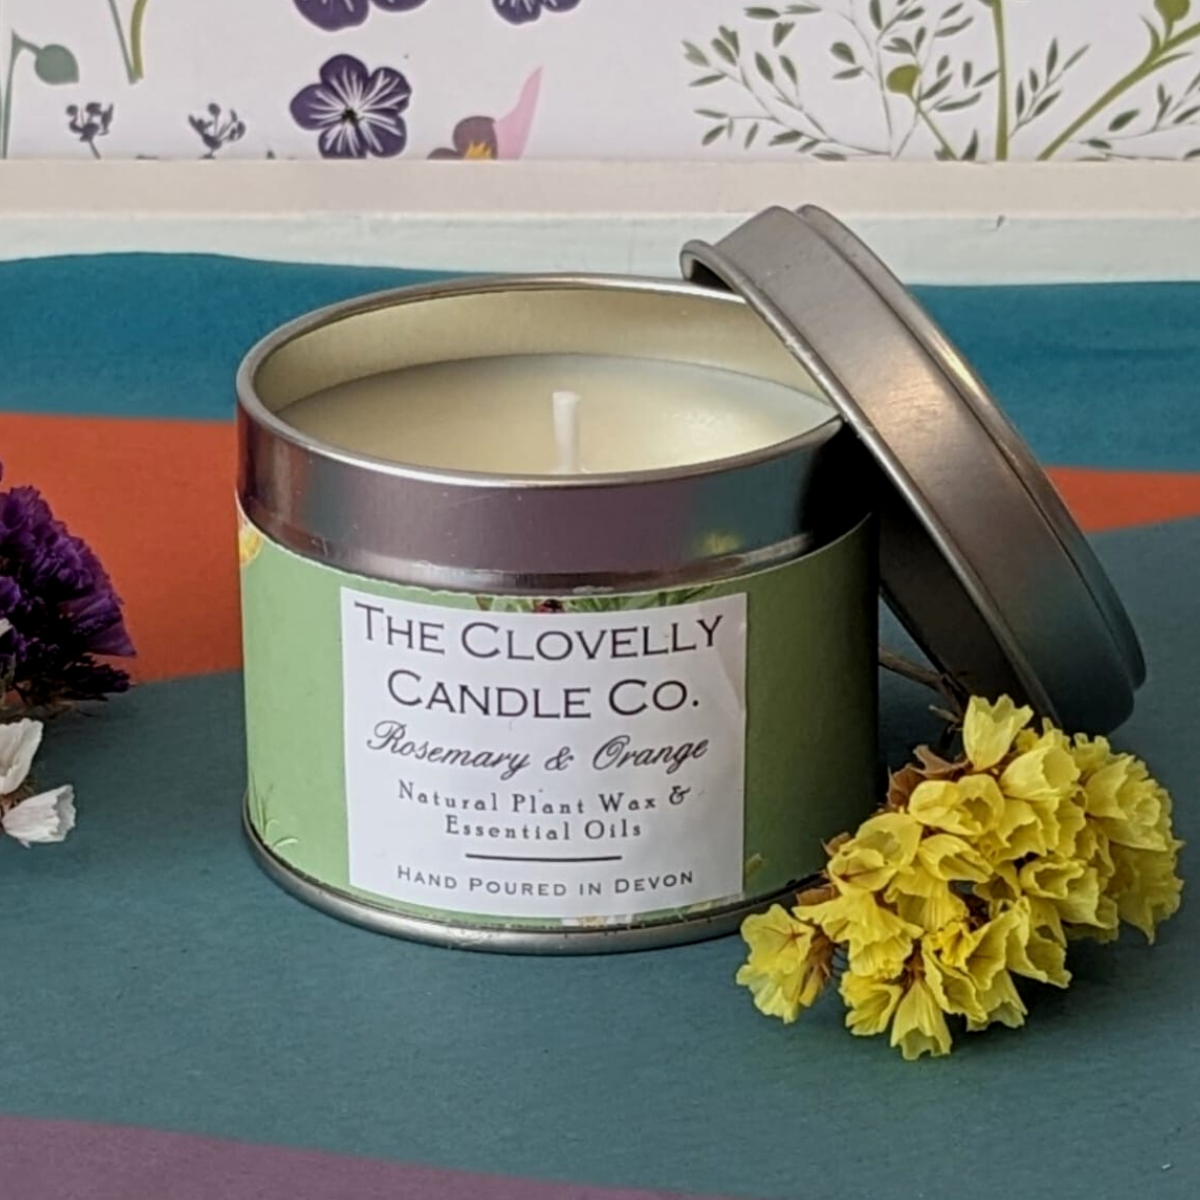 Clovelly rosemary & orange essential oil candle in tin